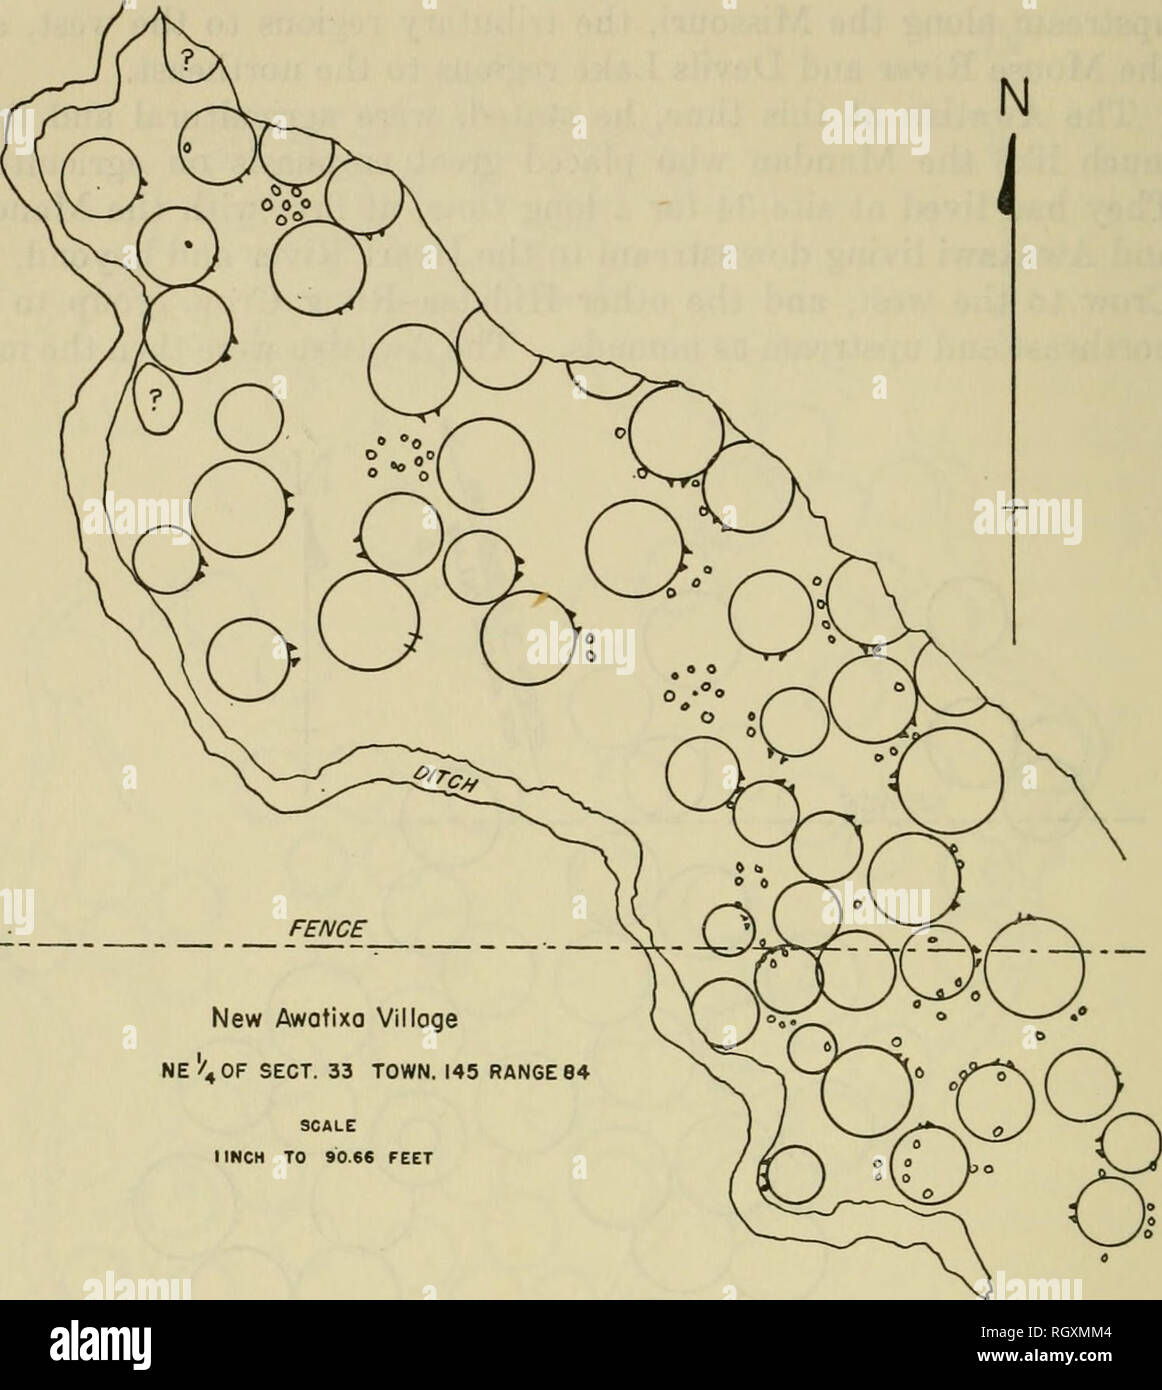 . Bulletin. Ethnology. 20 BUREAU OF AMERICAN ETHNOLOGY [Bull. 194. New Awotixa Village Ne!'40F sect. 33 TOWN. 145 RANGE 84 SCALE I INCH TO 90.66 FEET Map S.—New Awatixa village at the mouth of the Knife River. (Courtesy North Dakota Historical Society.) northern agriculturalists along the Missouri River. Concerning the Awaxawi, where his father was born, Bears Arm stated that this group was once more numerous and lived to the east as agriculturalists on the streams of that region and later at Devils Lake. There the Hidatsa-River Crow (called Miro'kac prior to the separation) found them and con Stock Photo